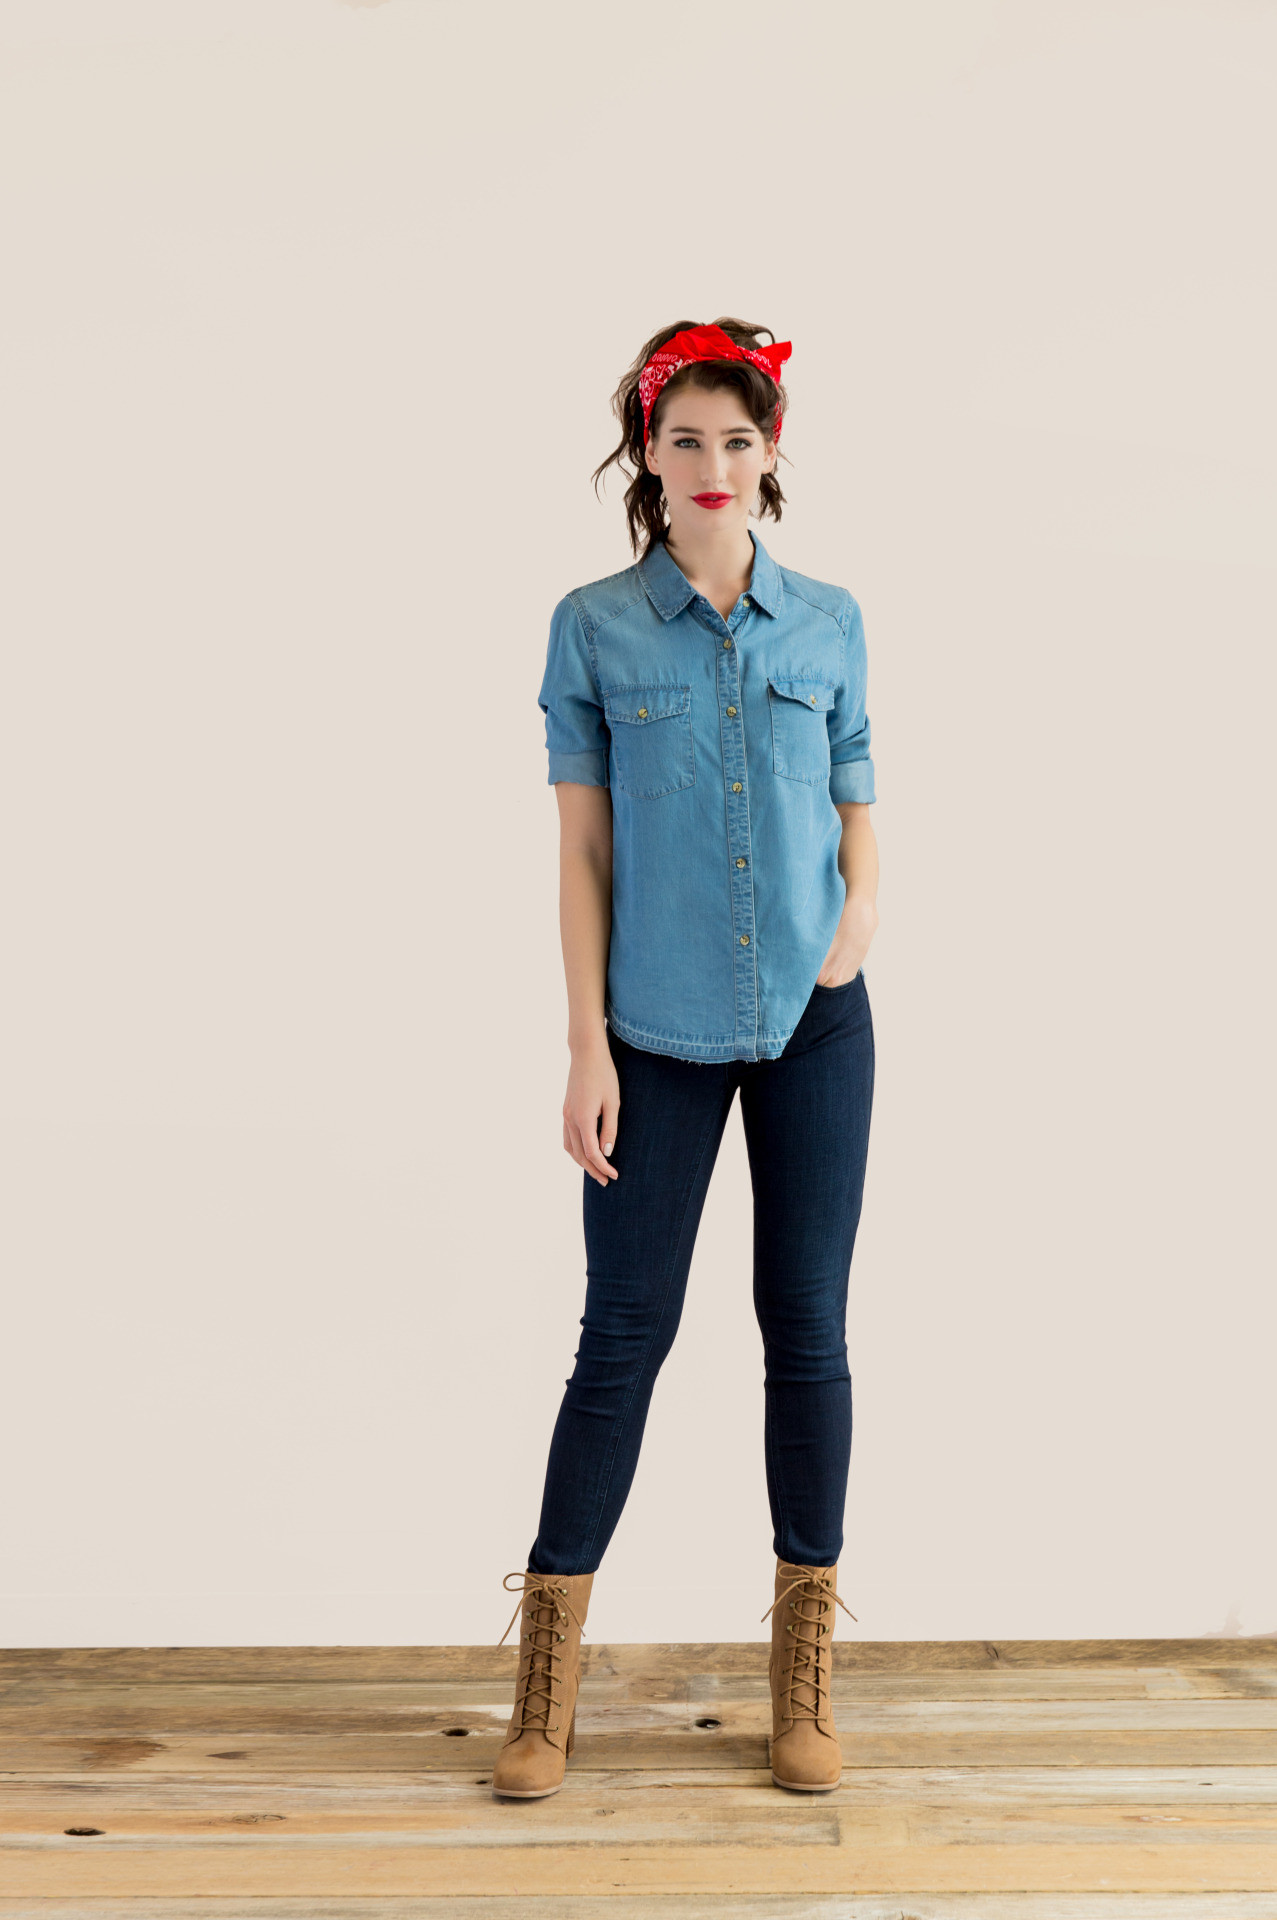 Rosie The Riveter Costume DIY
 Picking out the Perfect Halloween Costume